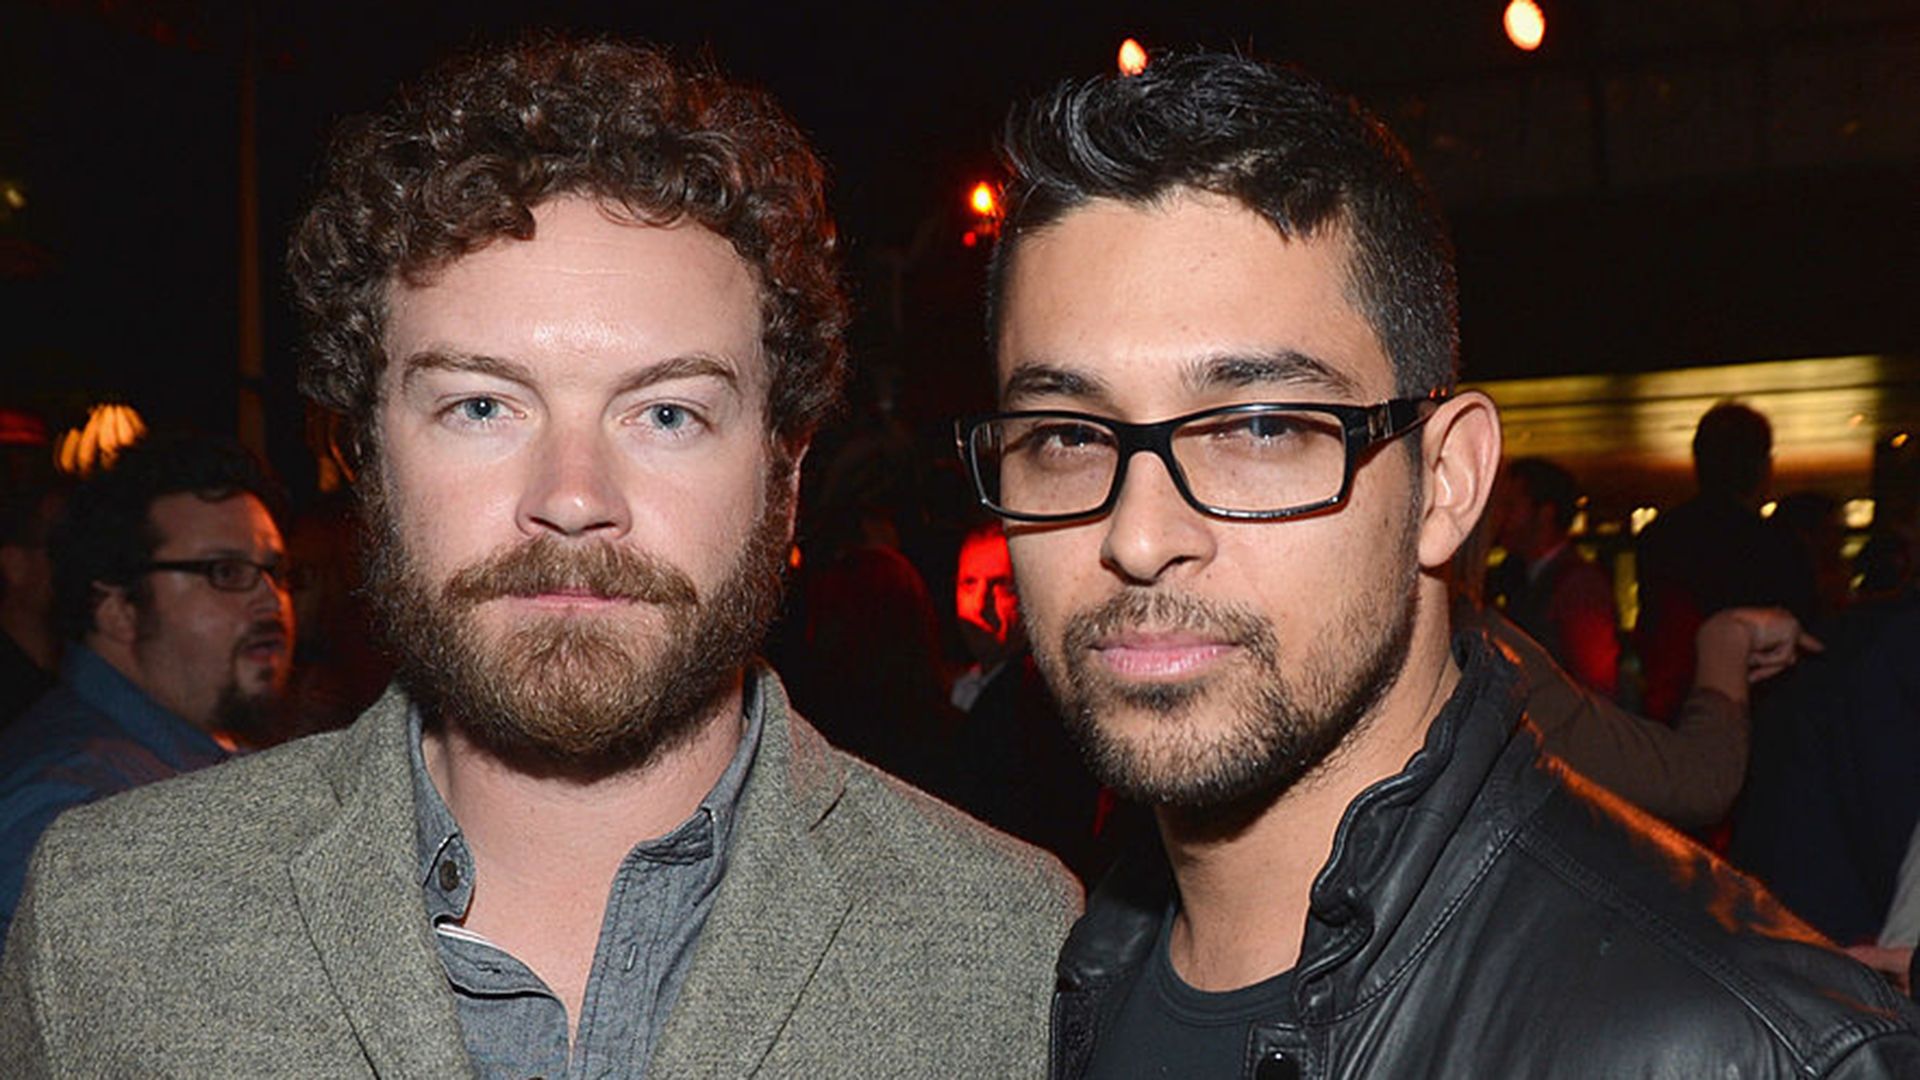 Actors Danny Masterson and Wilmer Valderrama attend the after party for the premiere of FilmDistrict's "Olympus Has Fallen" at Lure on March 18, 2013 